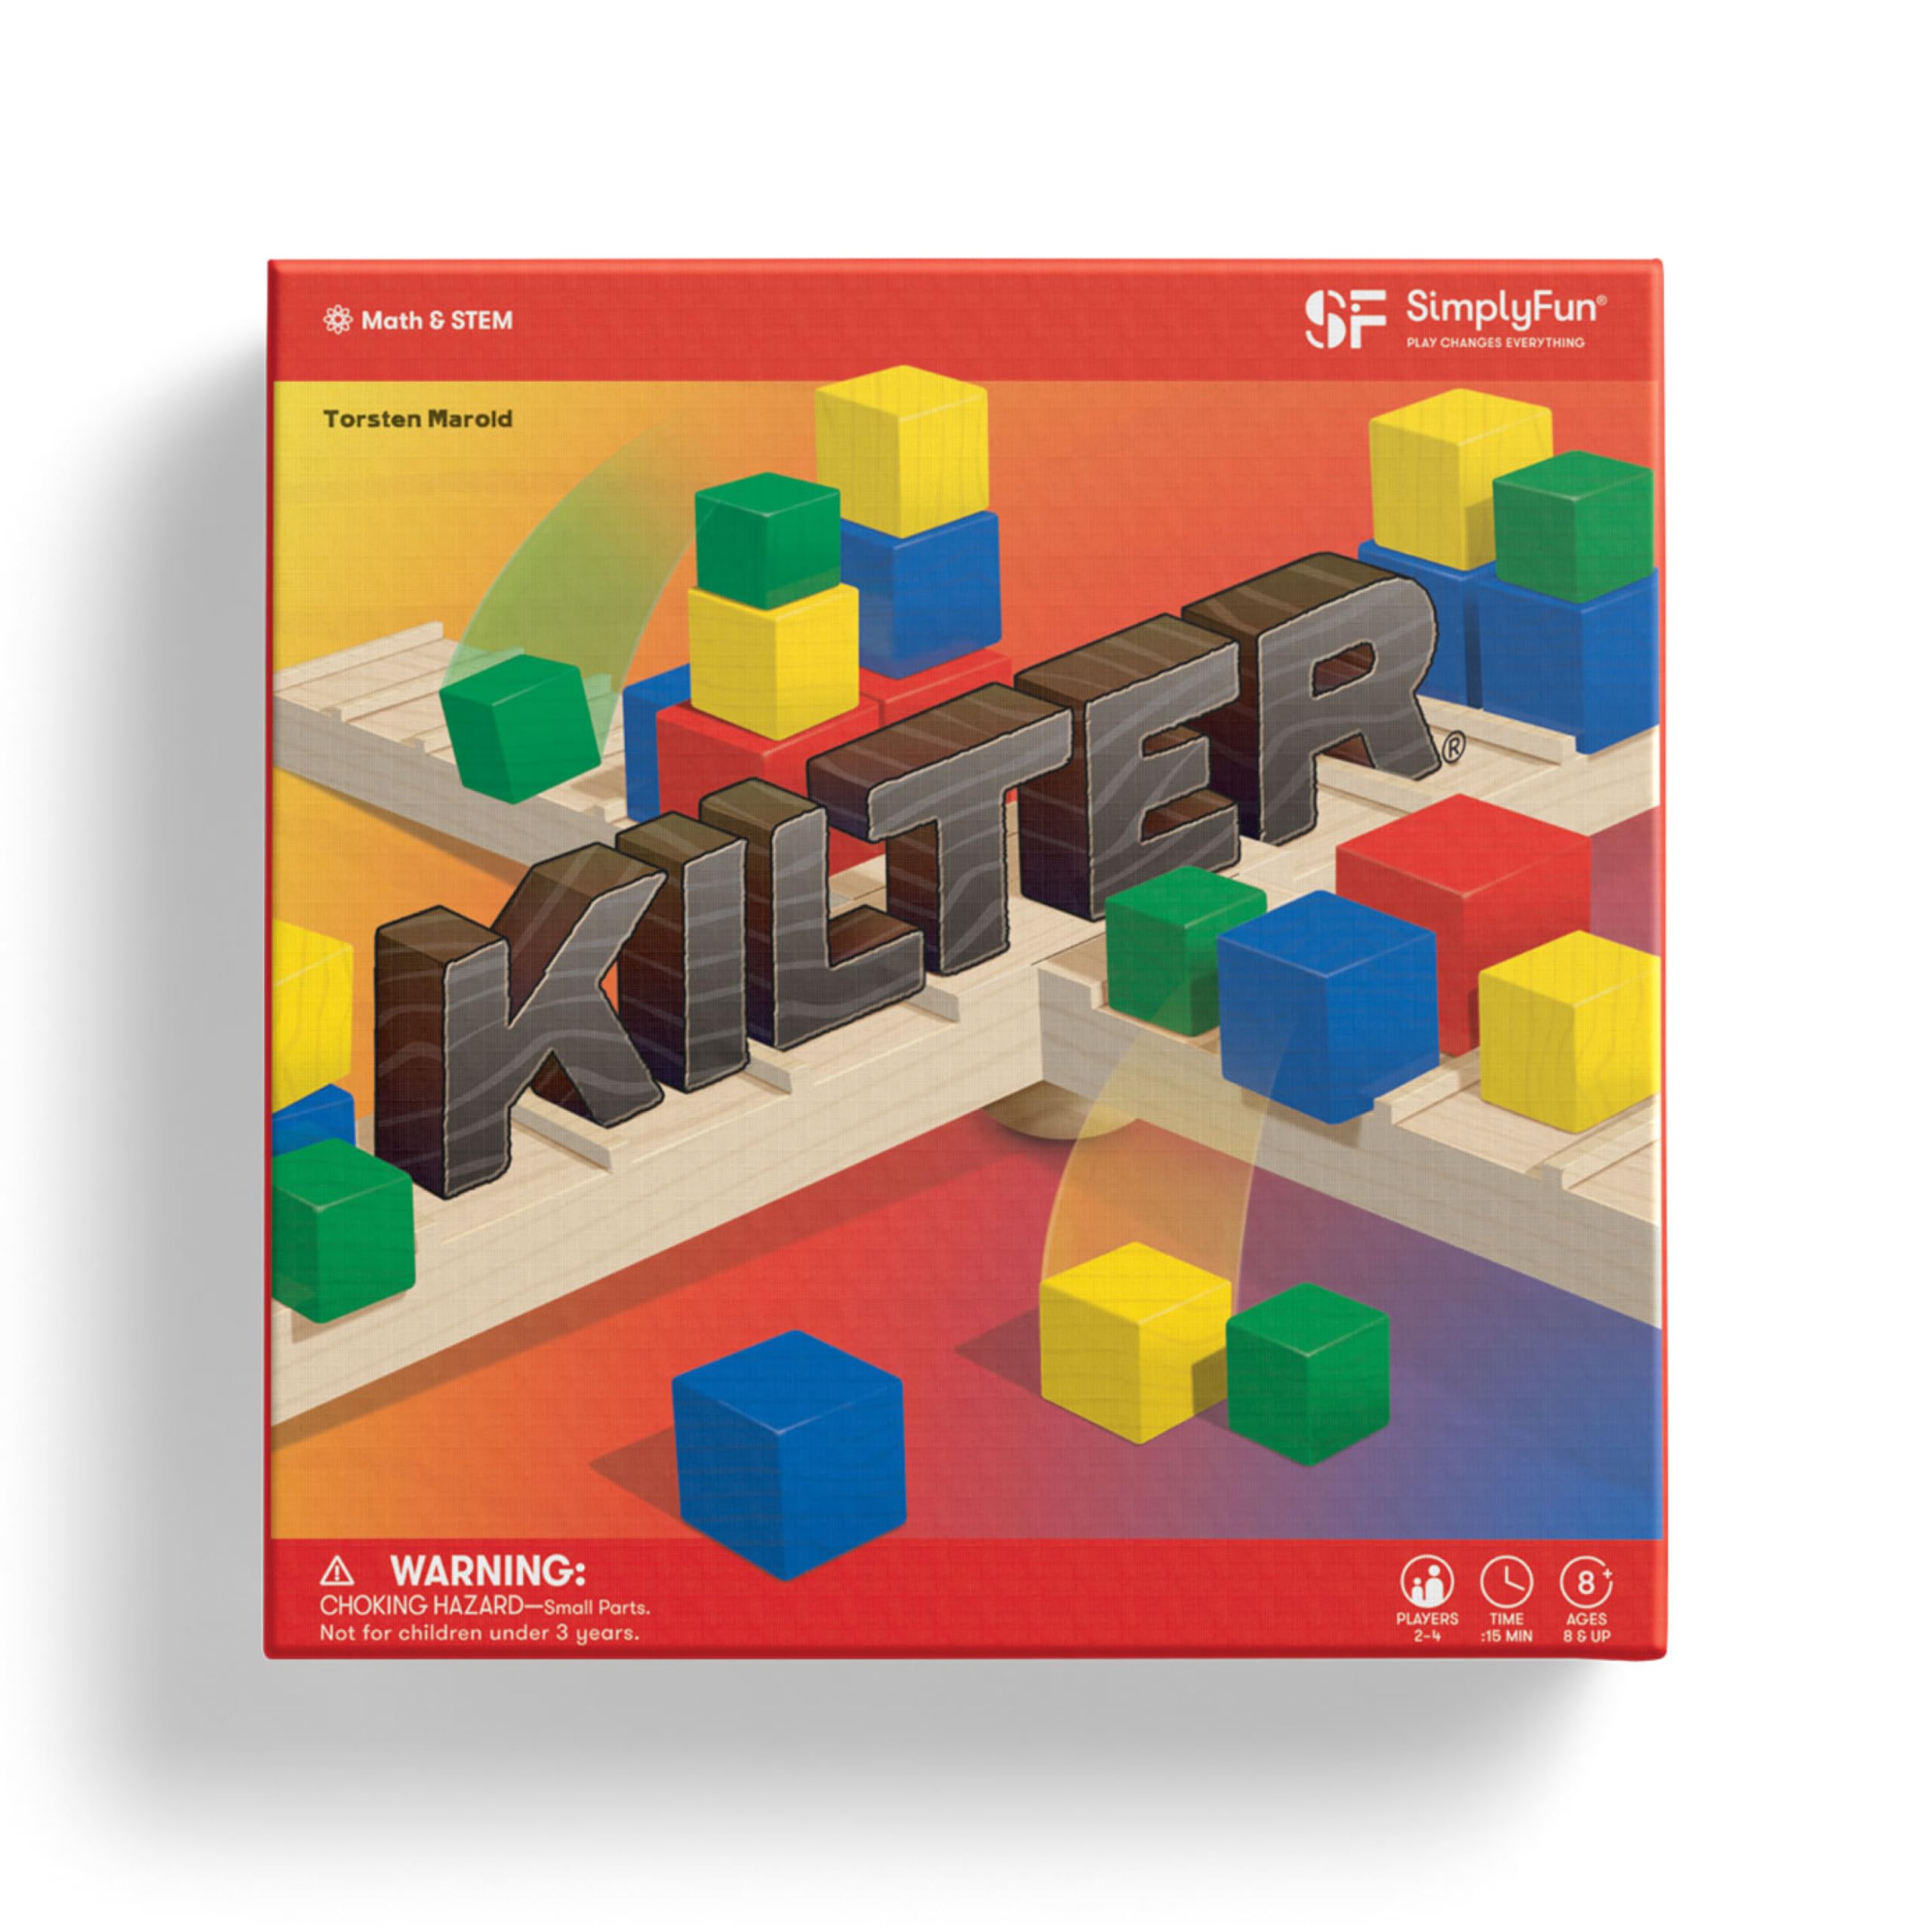 SimplyFun Kilter -The Educational Game of Levers & Motion - Irresistible Game & Hilarious Family Fun with an Introduction to Physics & Predicting Outcomes - Kids Game -  2 to 4 Players - Ages 8 & Up